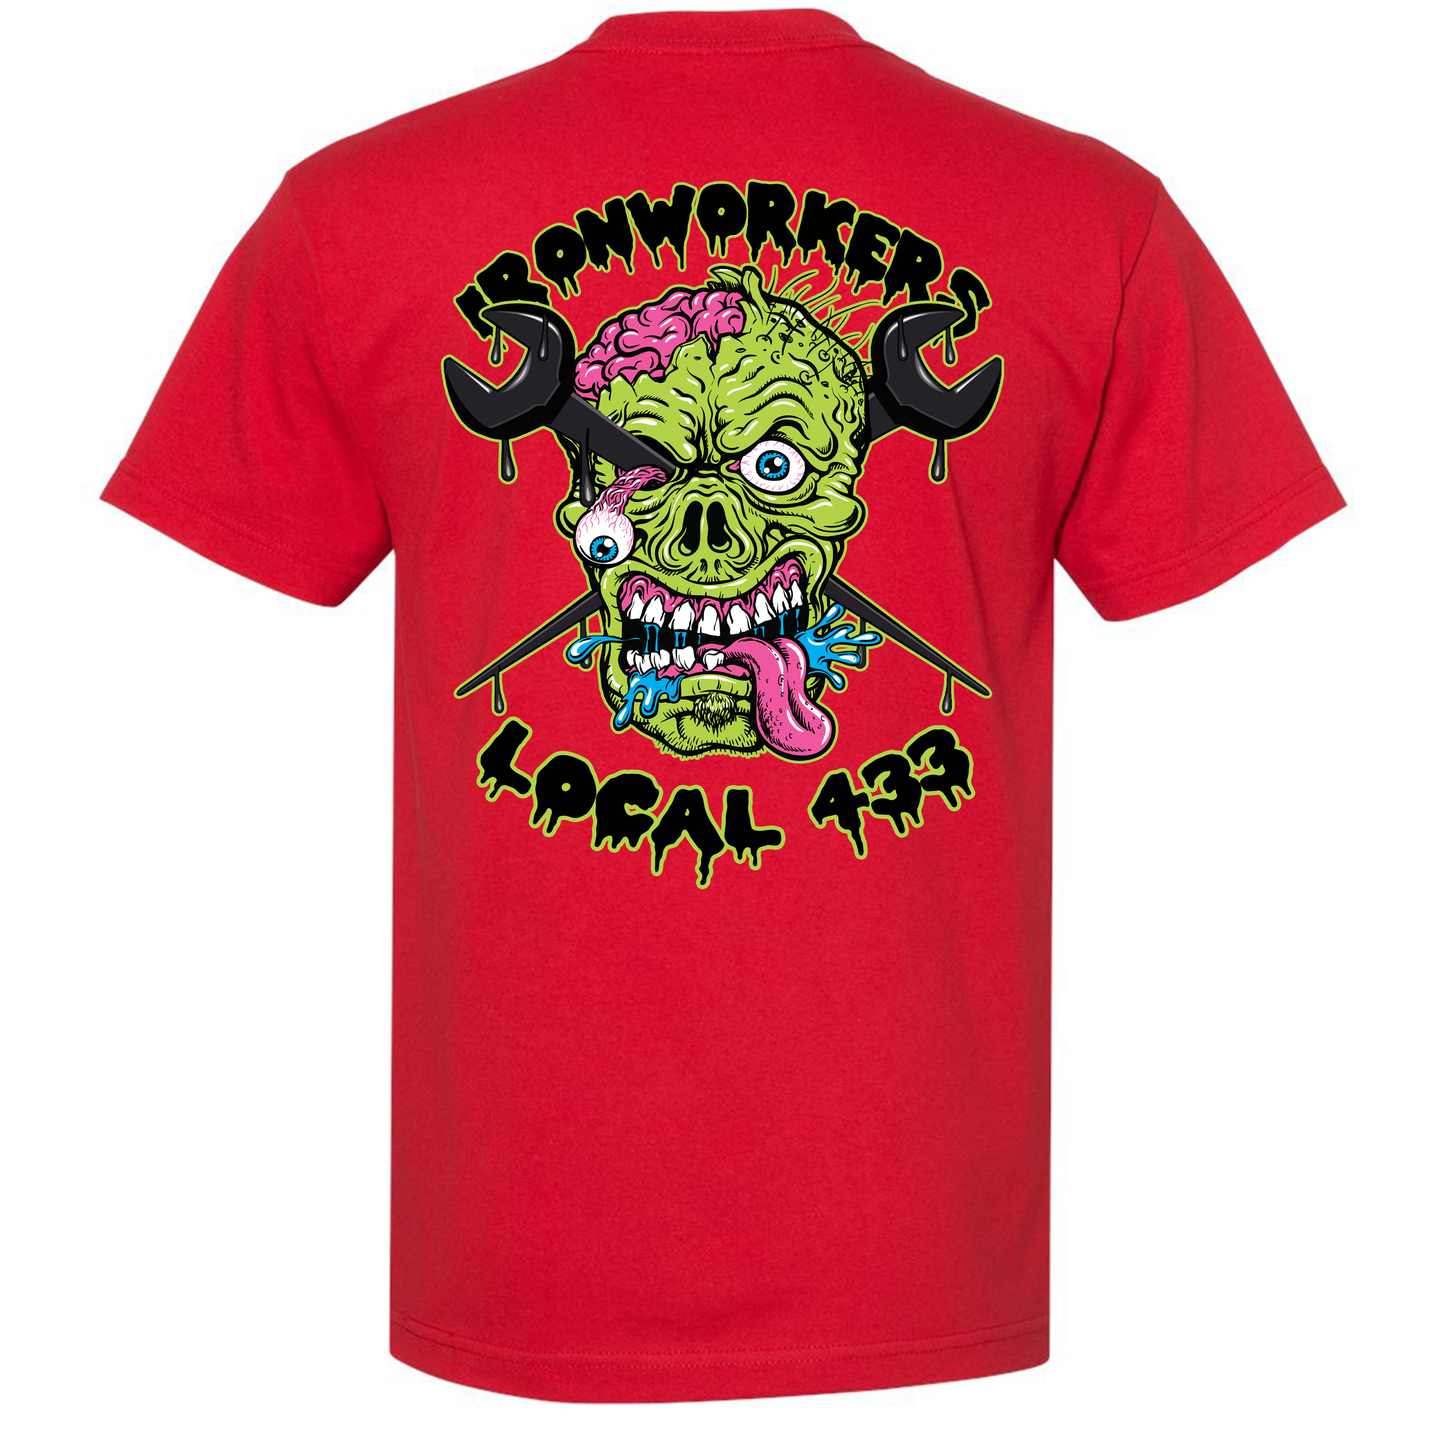 IW ZOMBIE LOCAL 433 T-SHIRT